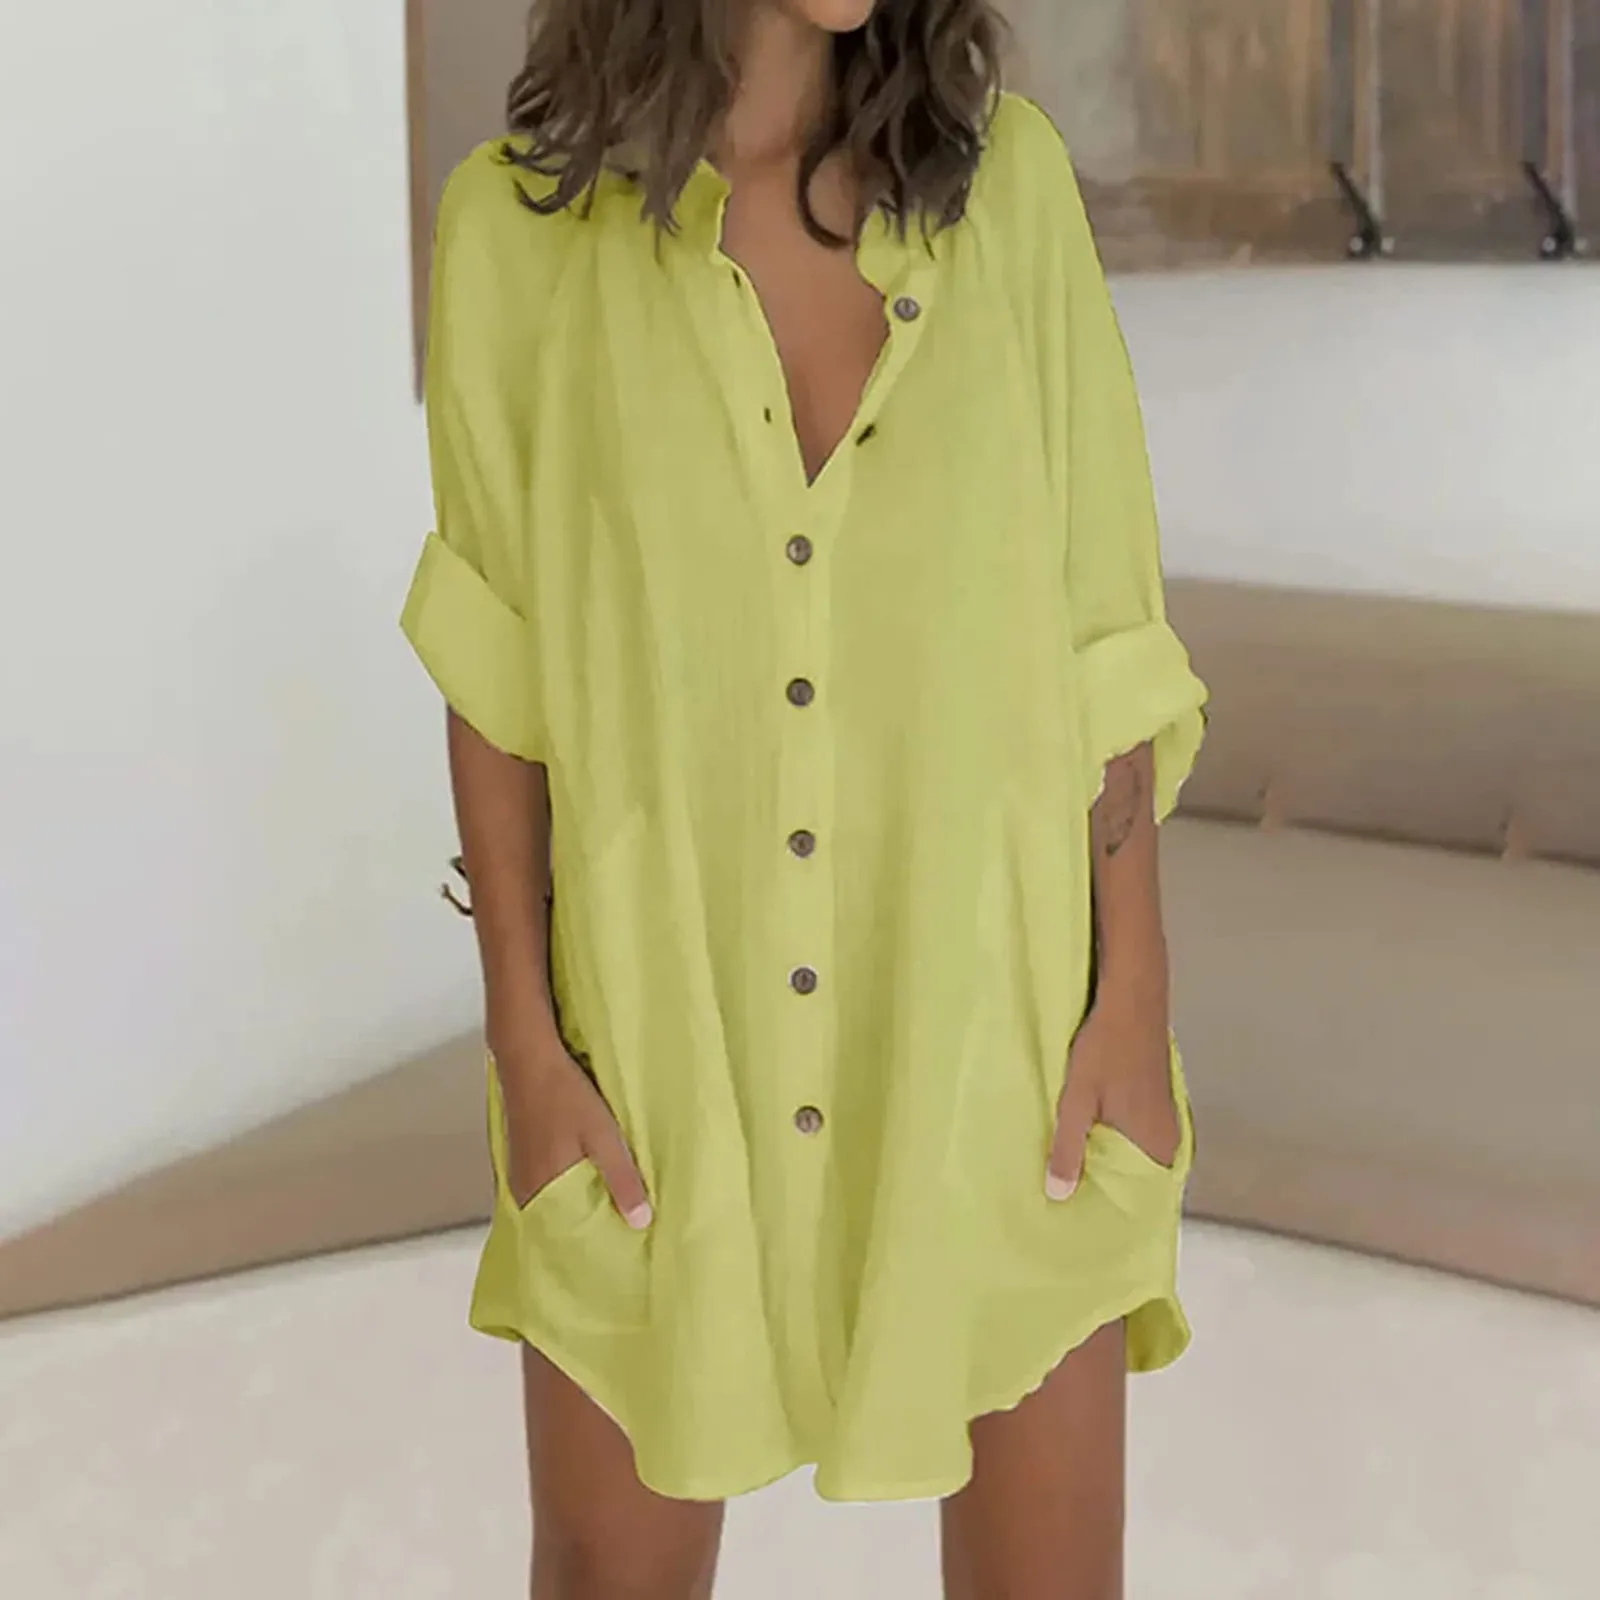 Cotton Linen Shirt Dress Women High Street Wear Button Down Blouse Long Tunic Dress Plus Size Blouse With Pocket Cover-up bathing suit and cover up set